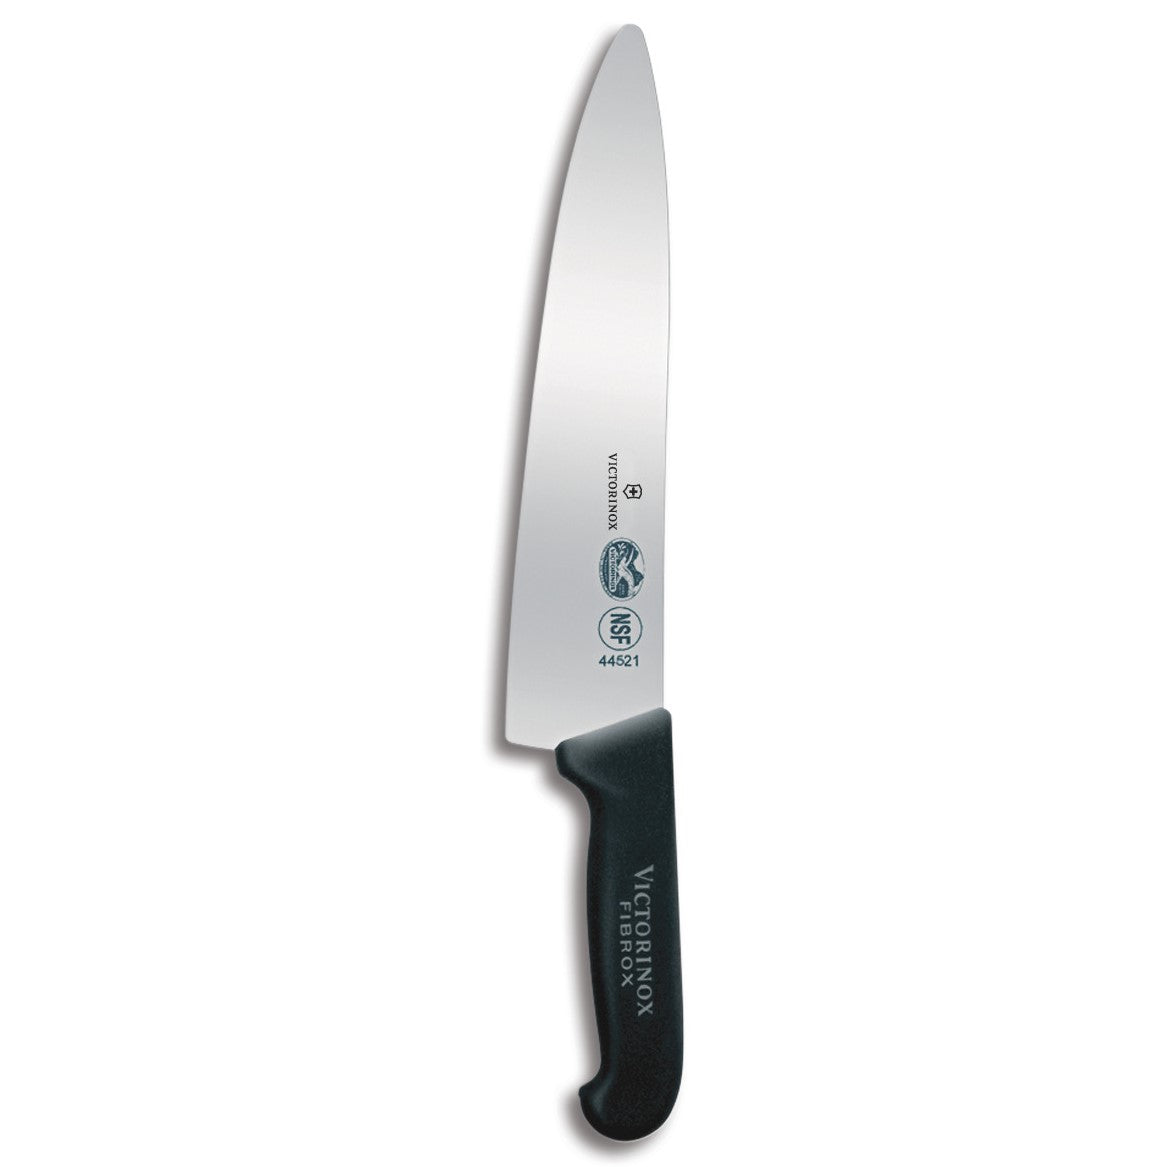 Victorinox Fibrox Pro 10” Chef's Knife w/ Rounded Tip – PERFECT